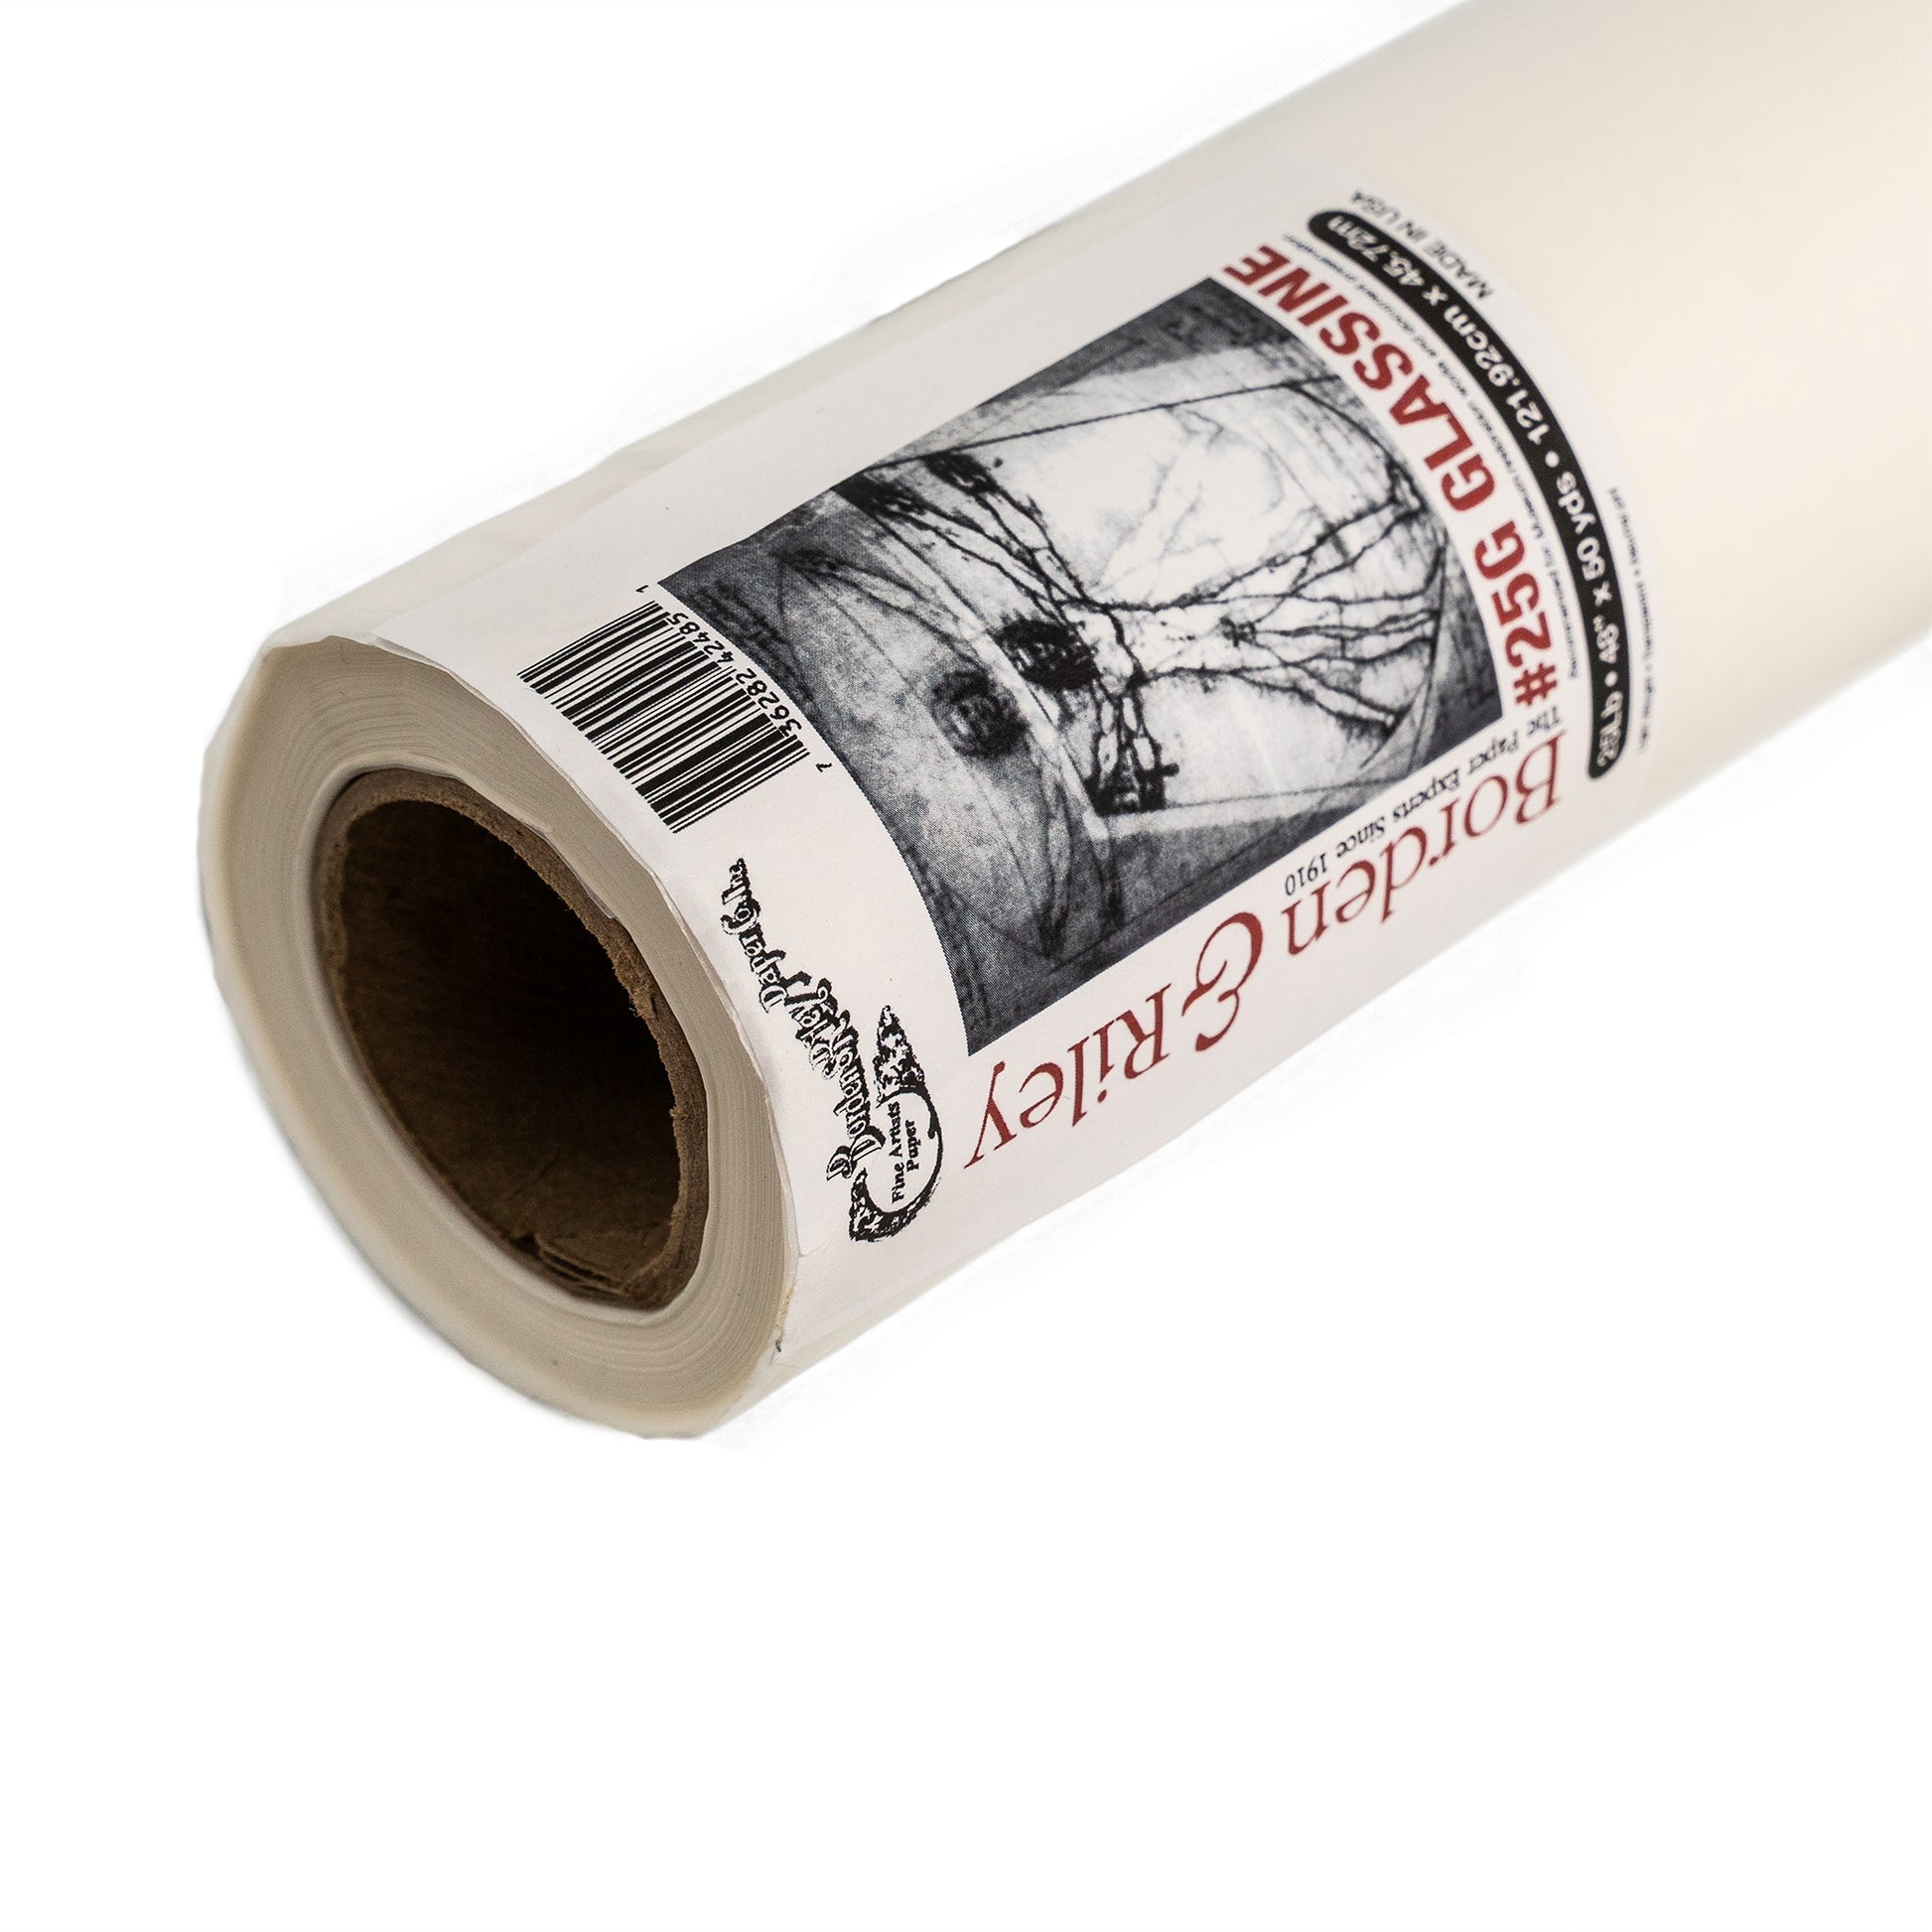 Borden and Riley #25G Glassine Paper Roll - 48 inches x 20 yards